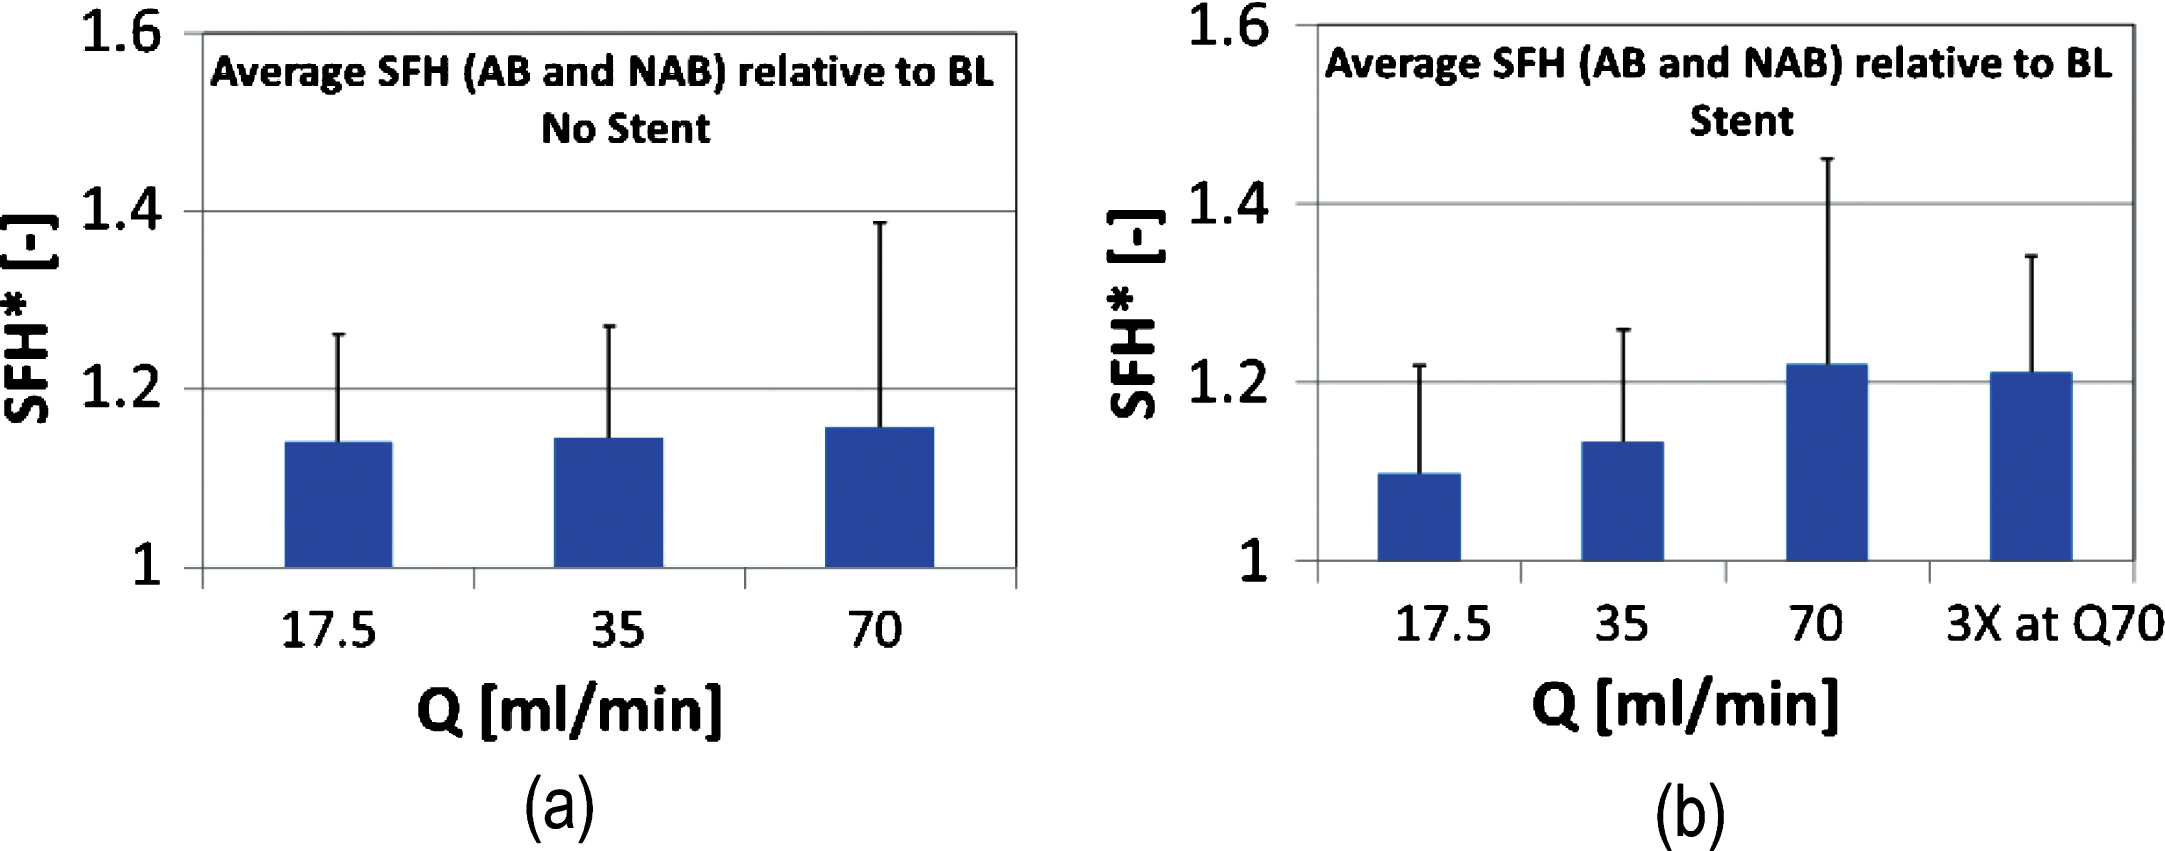 Average (n = 10) serum free haemoglobin for both AB and NAB samples, normalised by the BL case values (SFH*) (the non- stented case is shown in panel (a)). SFH* for the stented case is shown in panel (b).